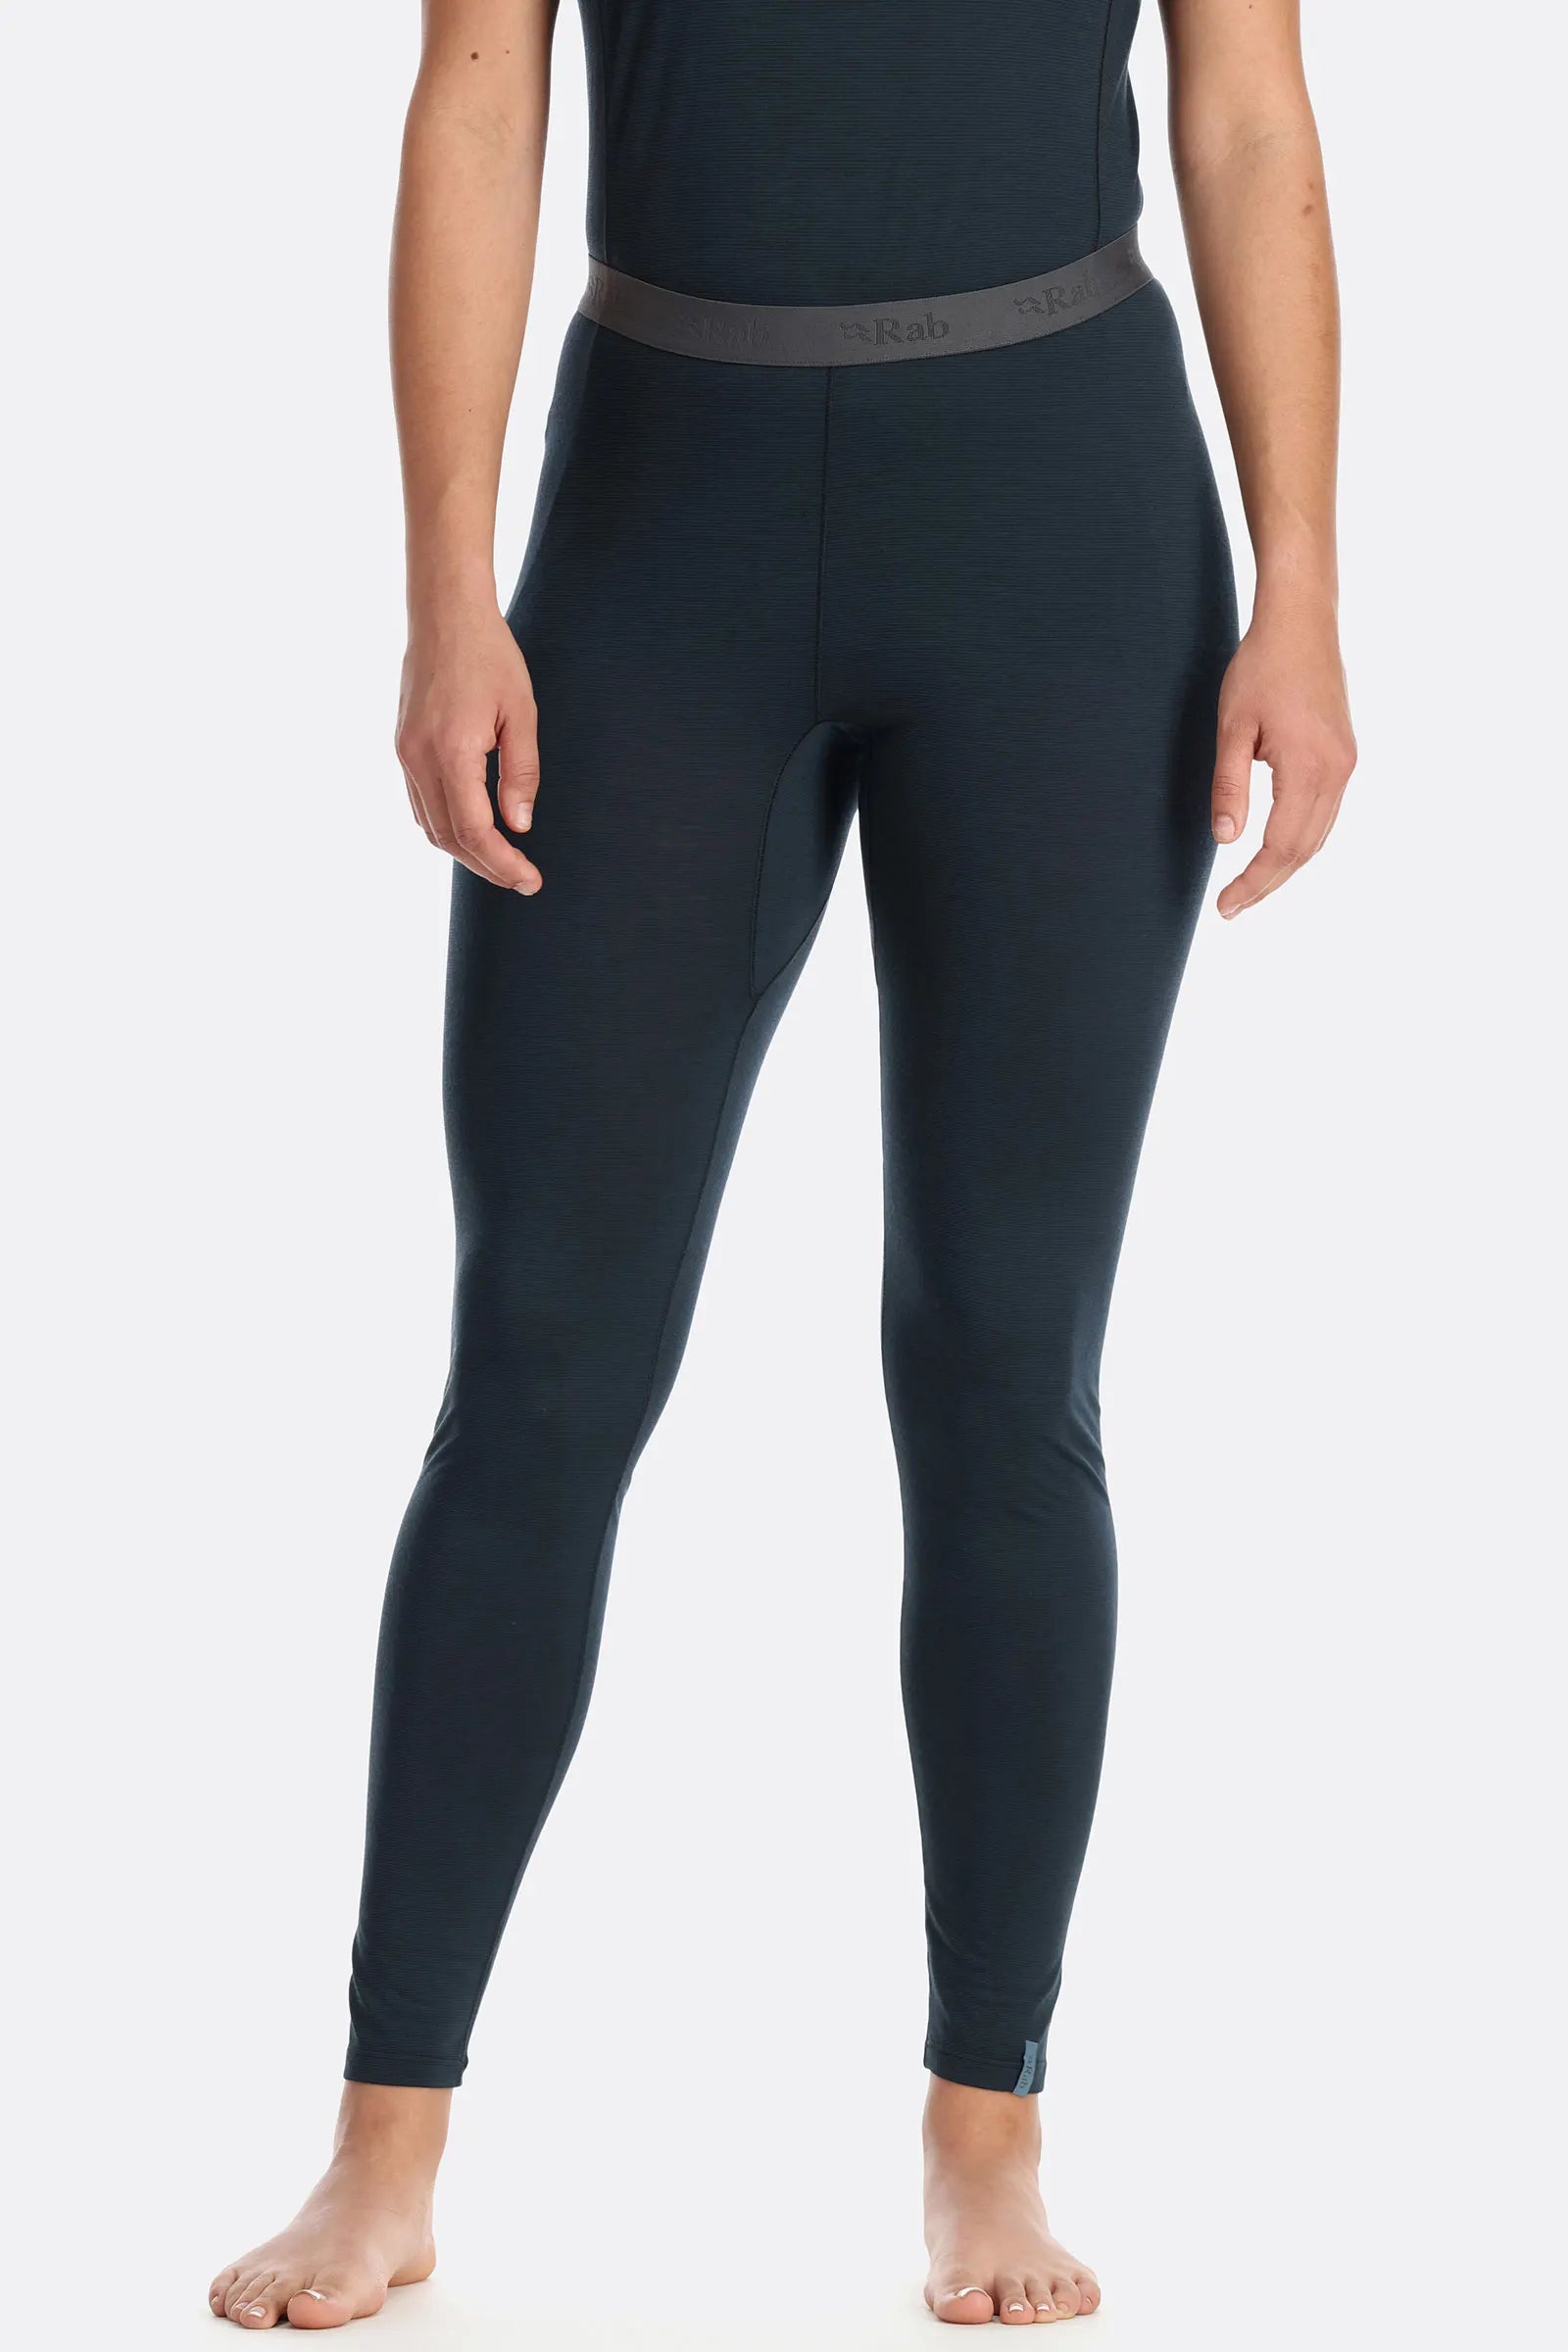 Rab Women's Syncrino Leggings - Outfitters Store